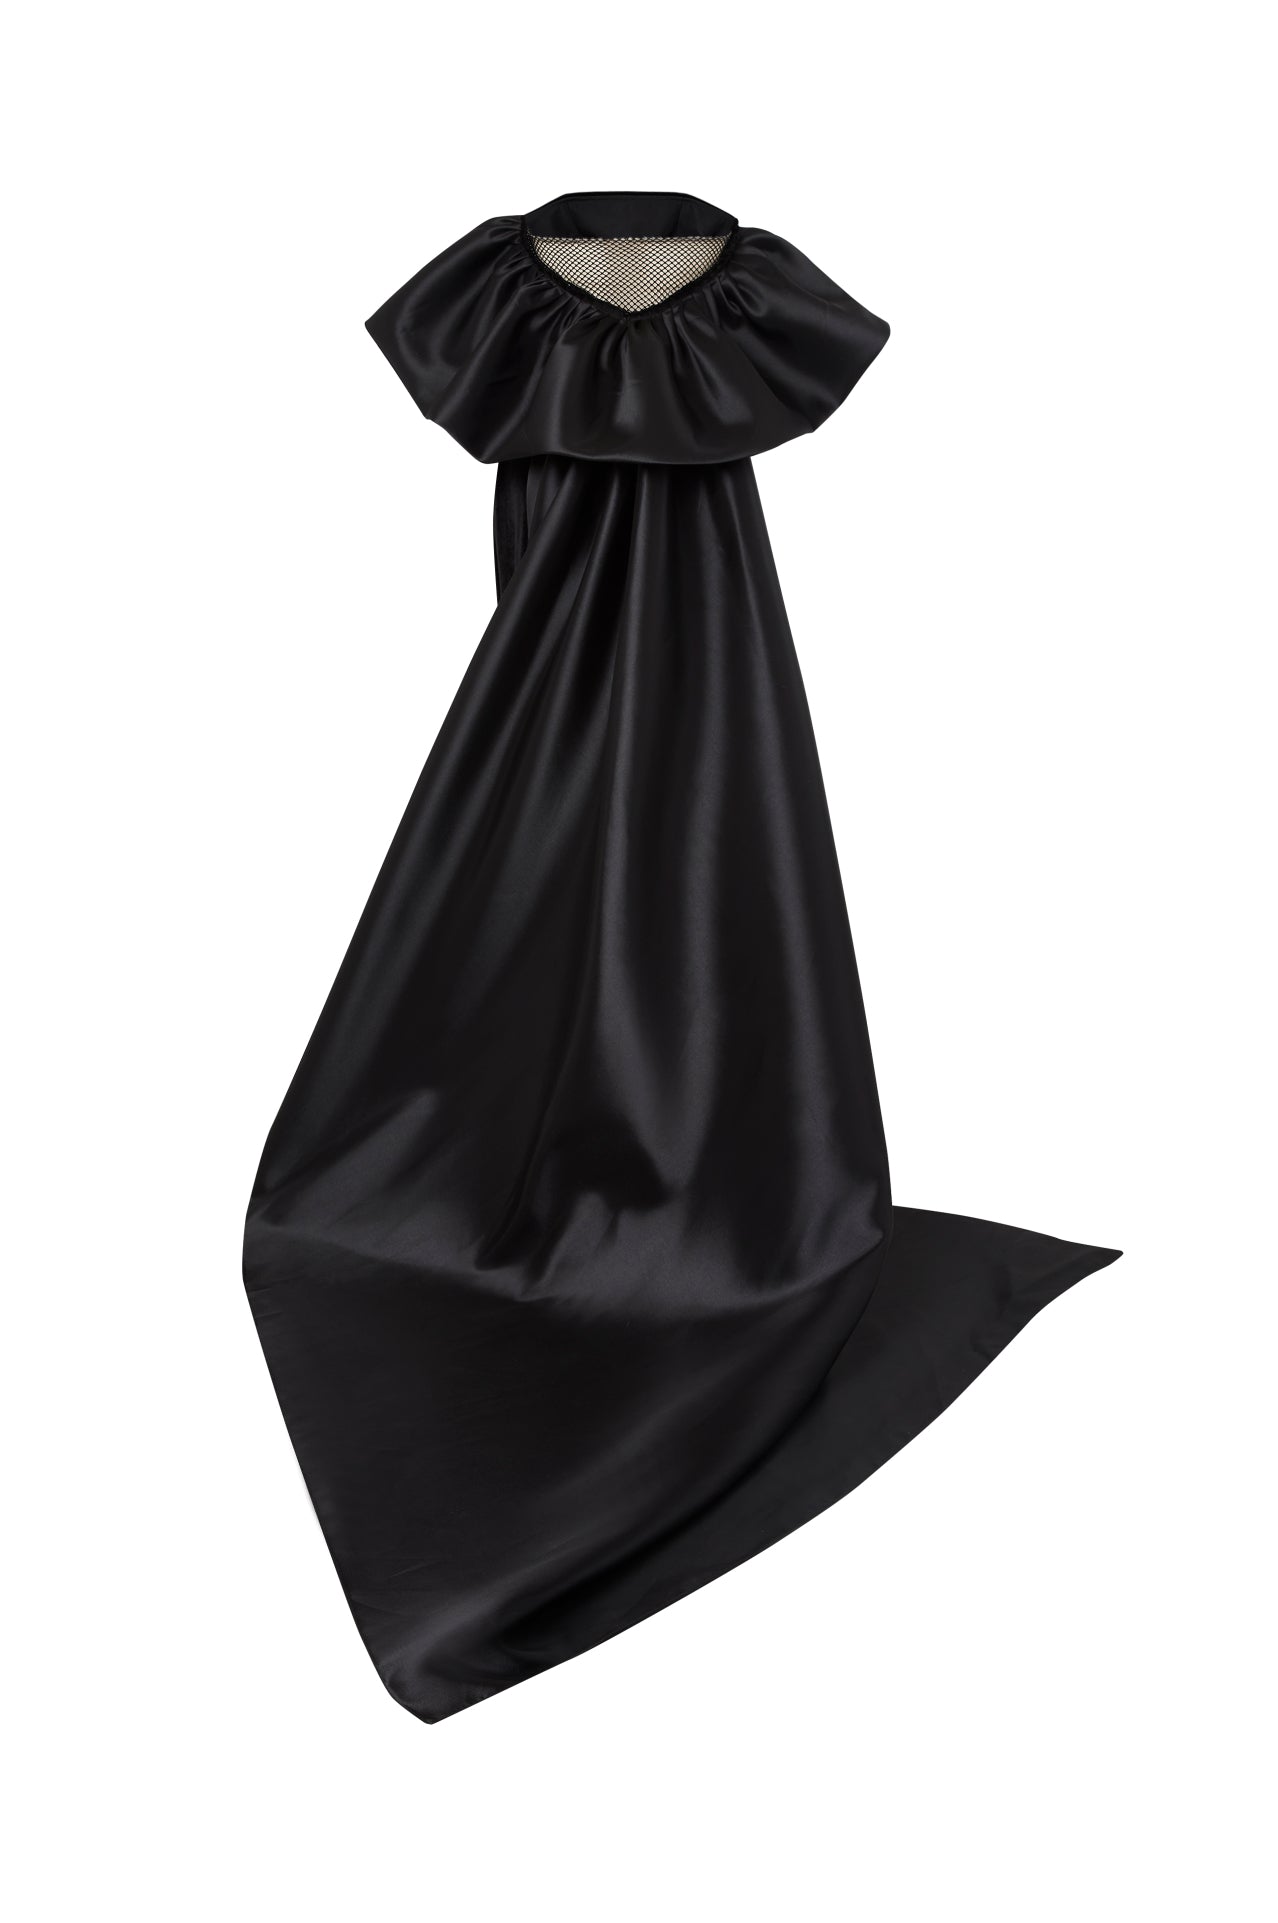 Strapless velvet dress with statement train and tulle glove